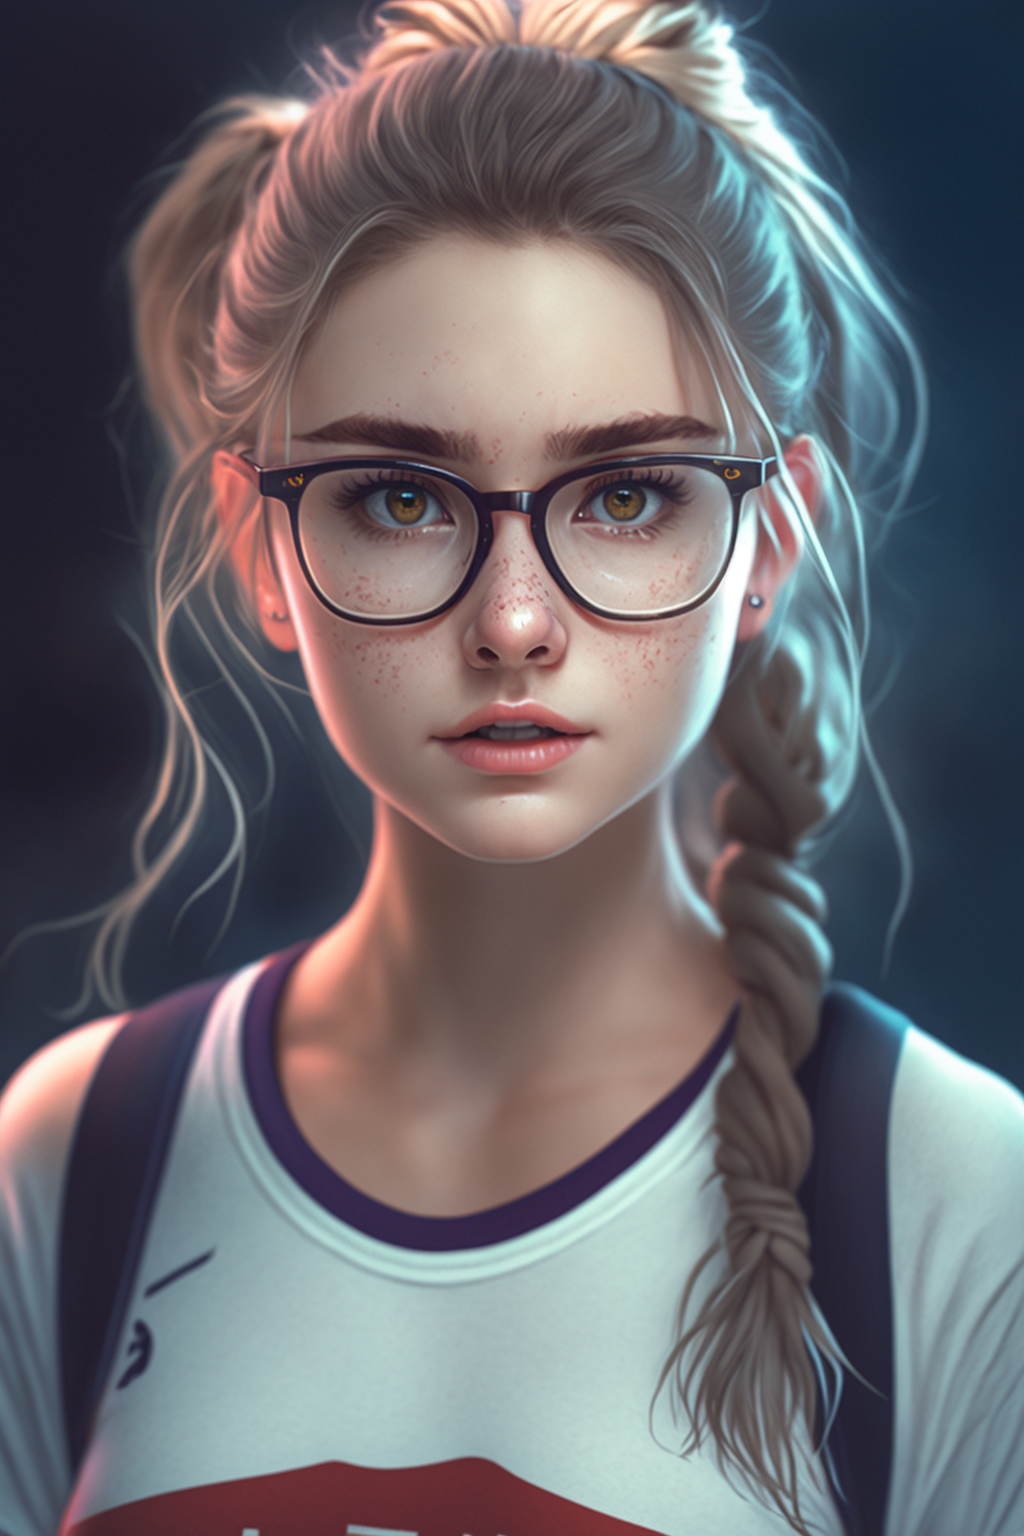 Anime 1024x1536 glass portrait display glasses braids women face freckles looking at viewer